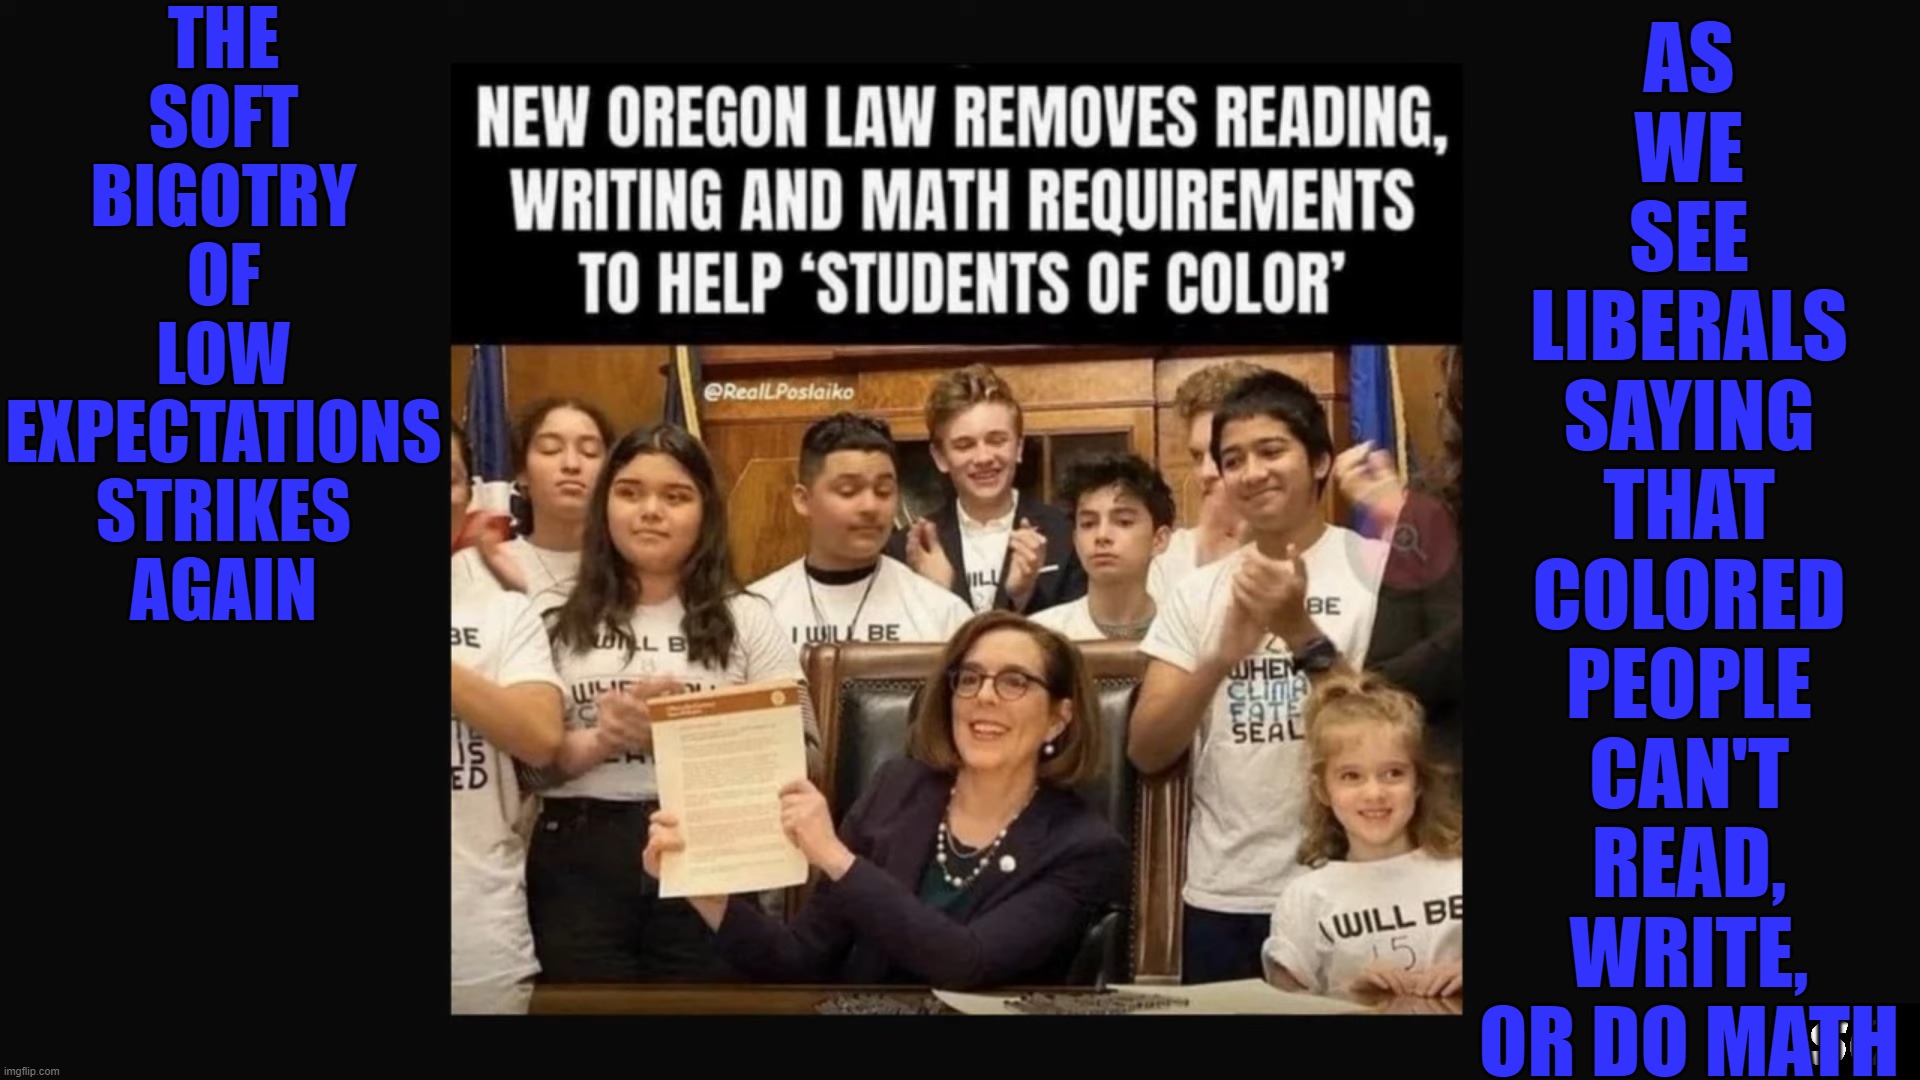 Colored People Are Dumb | THE
SOFT
BIGOTRY
OF
LOW
EXPECTATIONS
STRIKES
AGAIN; AS
WE
SEE
LIBERALS
SAYING
THAT
COLORED
PEOPLE
CAN'T
READ,
WRITE,
OR DO MATH | image tagged in racism,liberals,low expectations | made w/ Imgflip meme maker